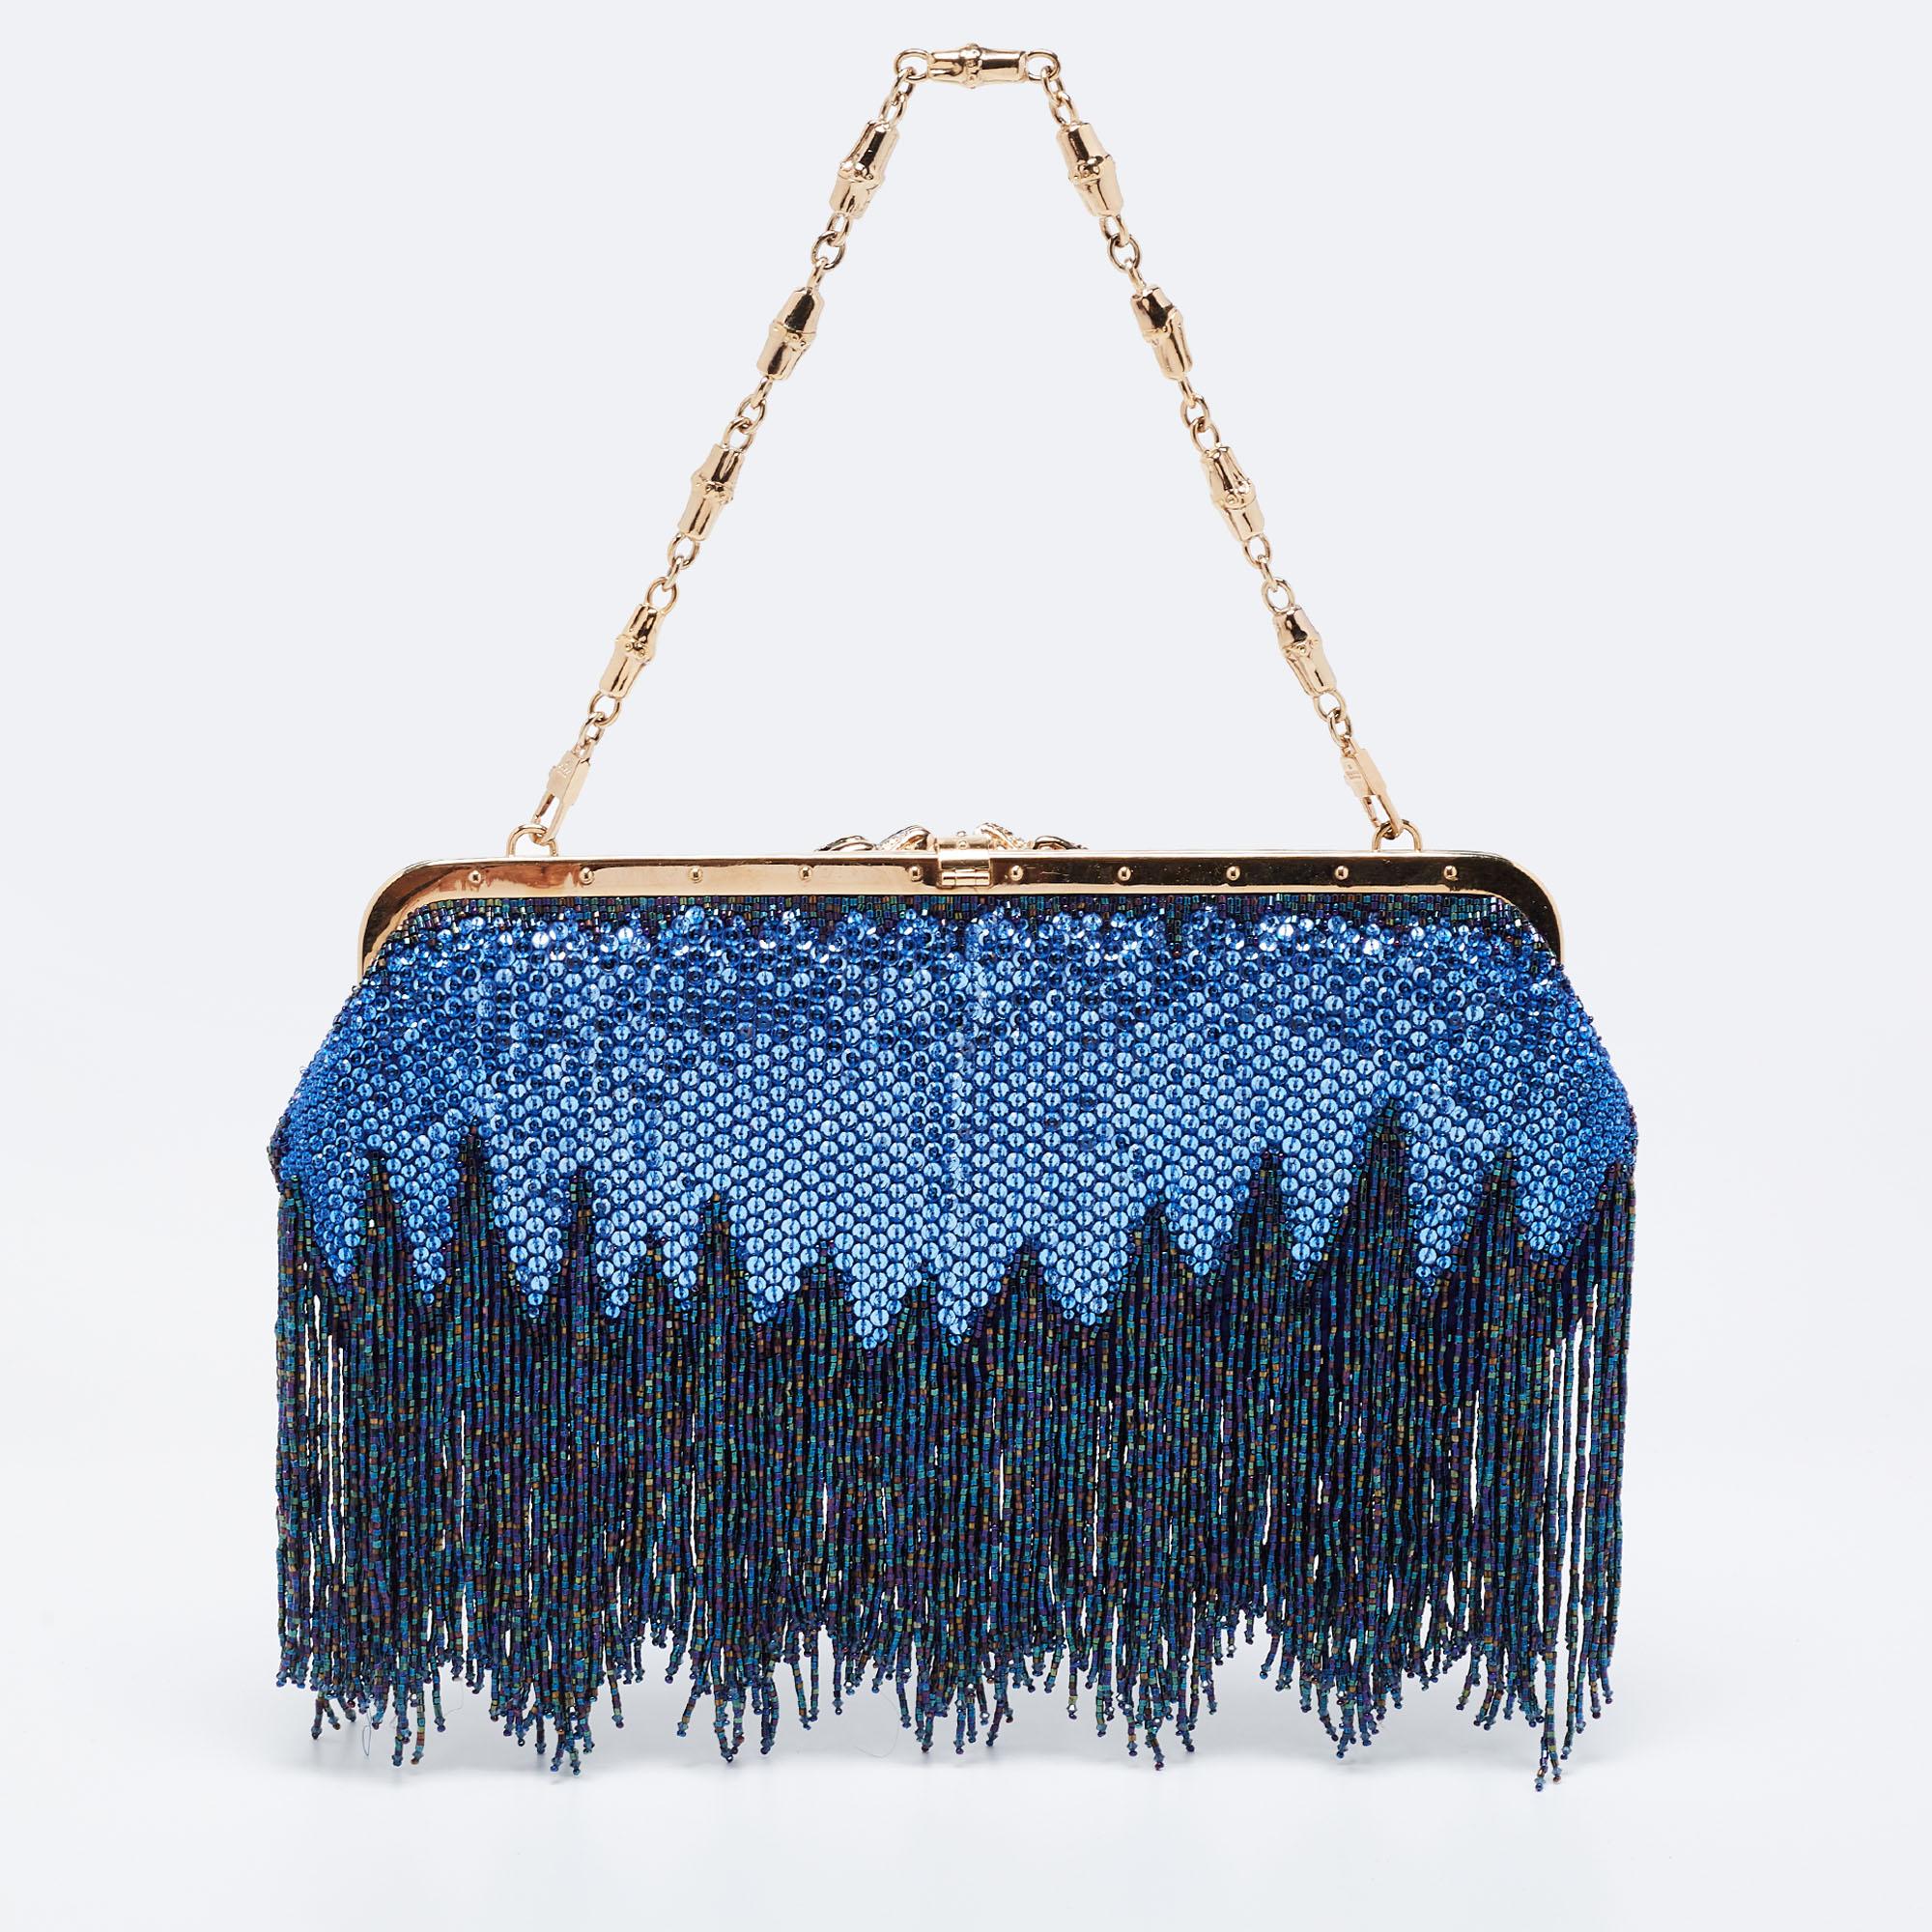 Coming from Gucci is this beautiful creation that is the perfect evening bag. It is crafted from sequins and satin into a structured shape and flaunts gold-tone hardware, fringe detailing, dragon embellishments, a single chain handle, and a roomy